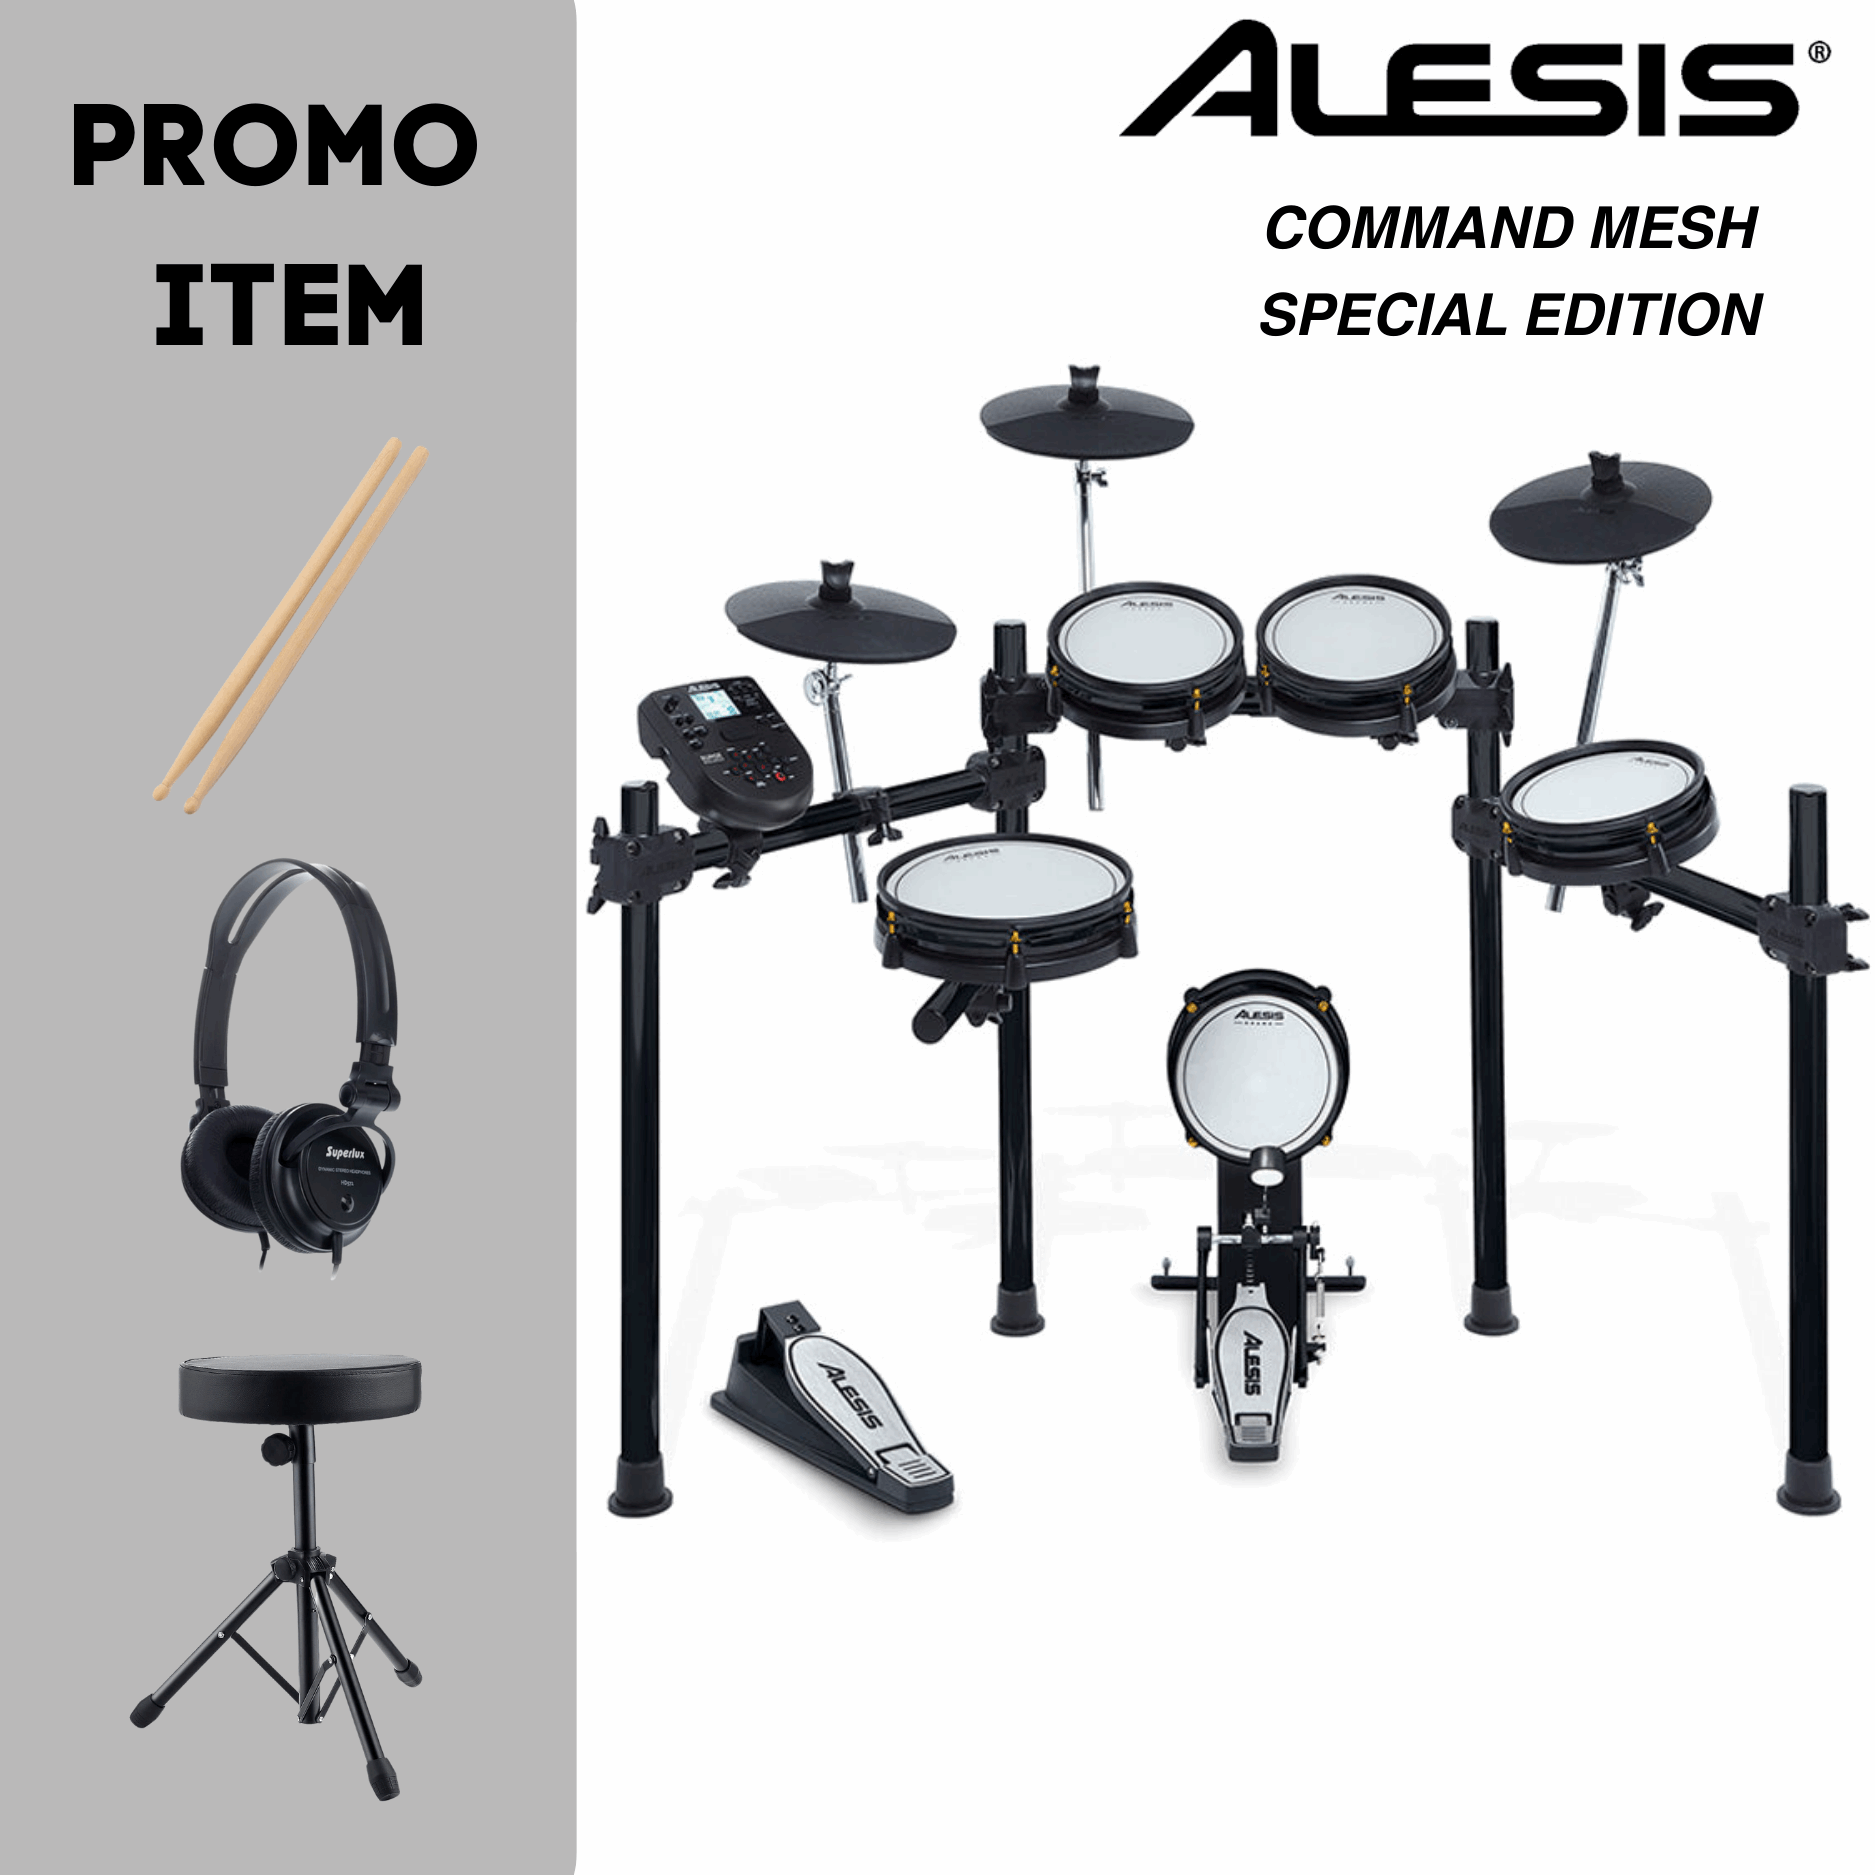 Alesis Command Mesh Special Edition with Promo Items Zoso Music